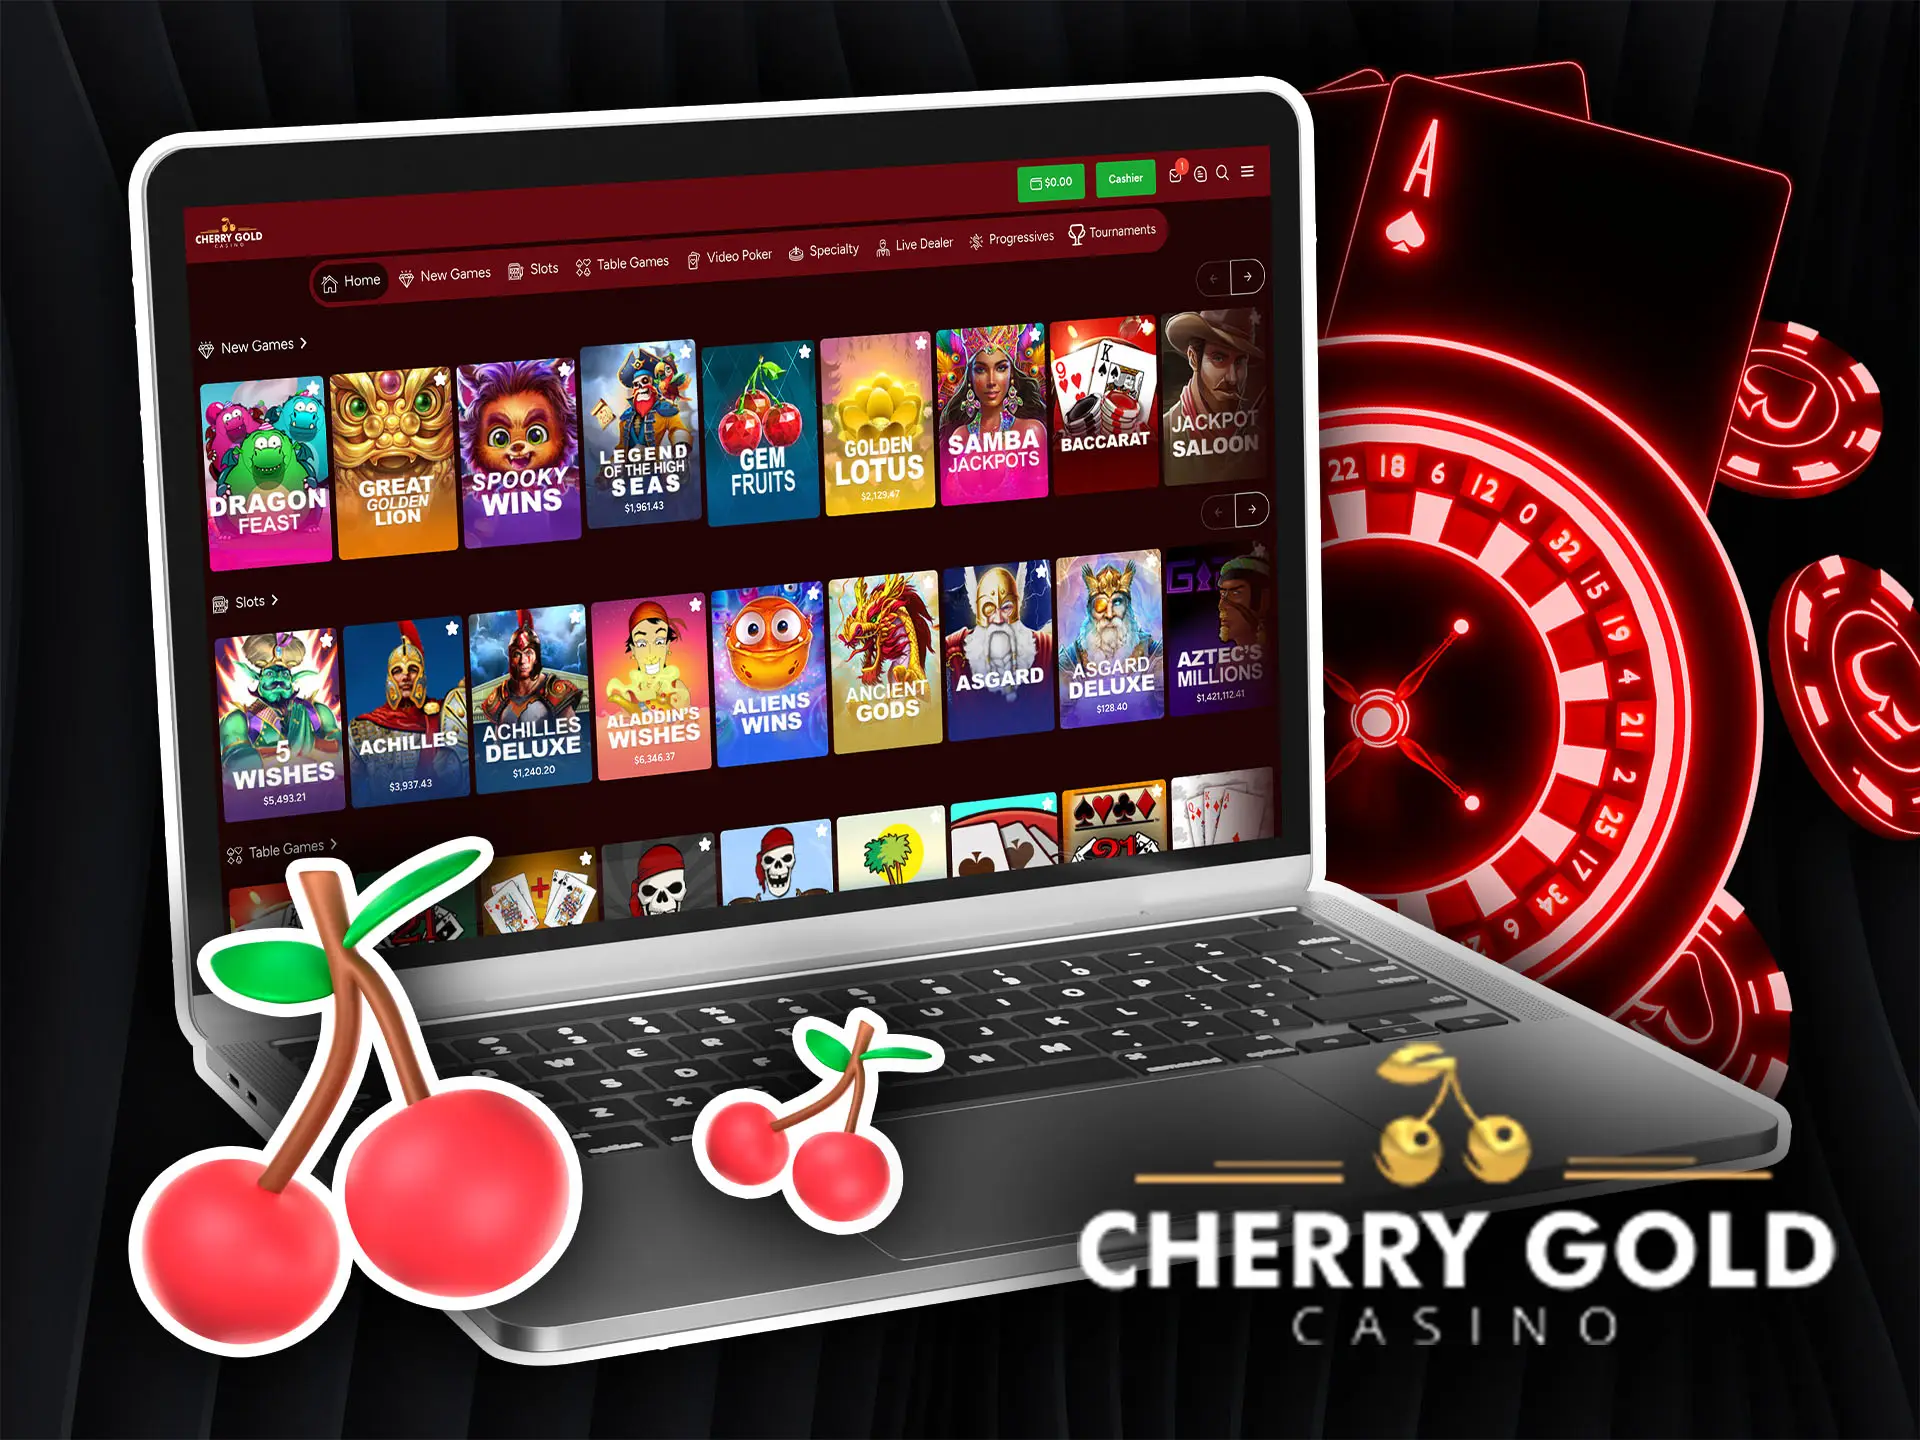 Types of games at Cherry Gold Casino.